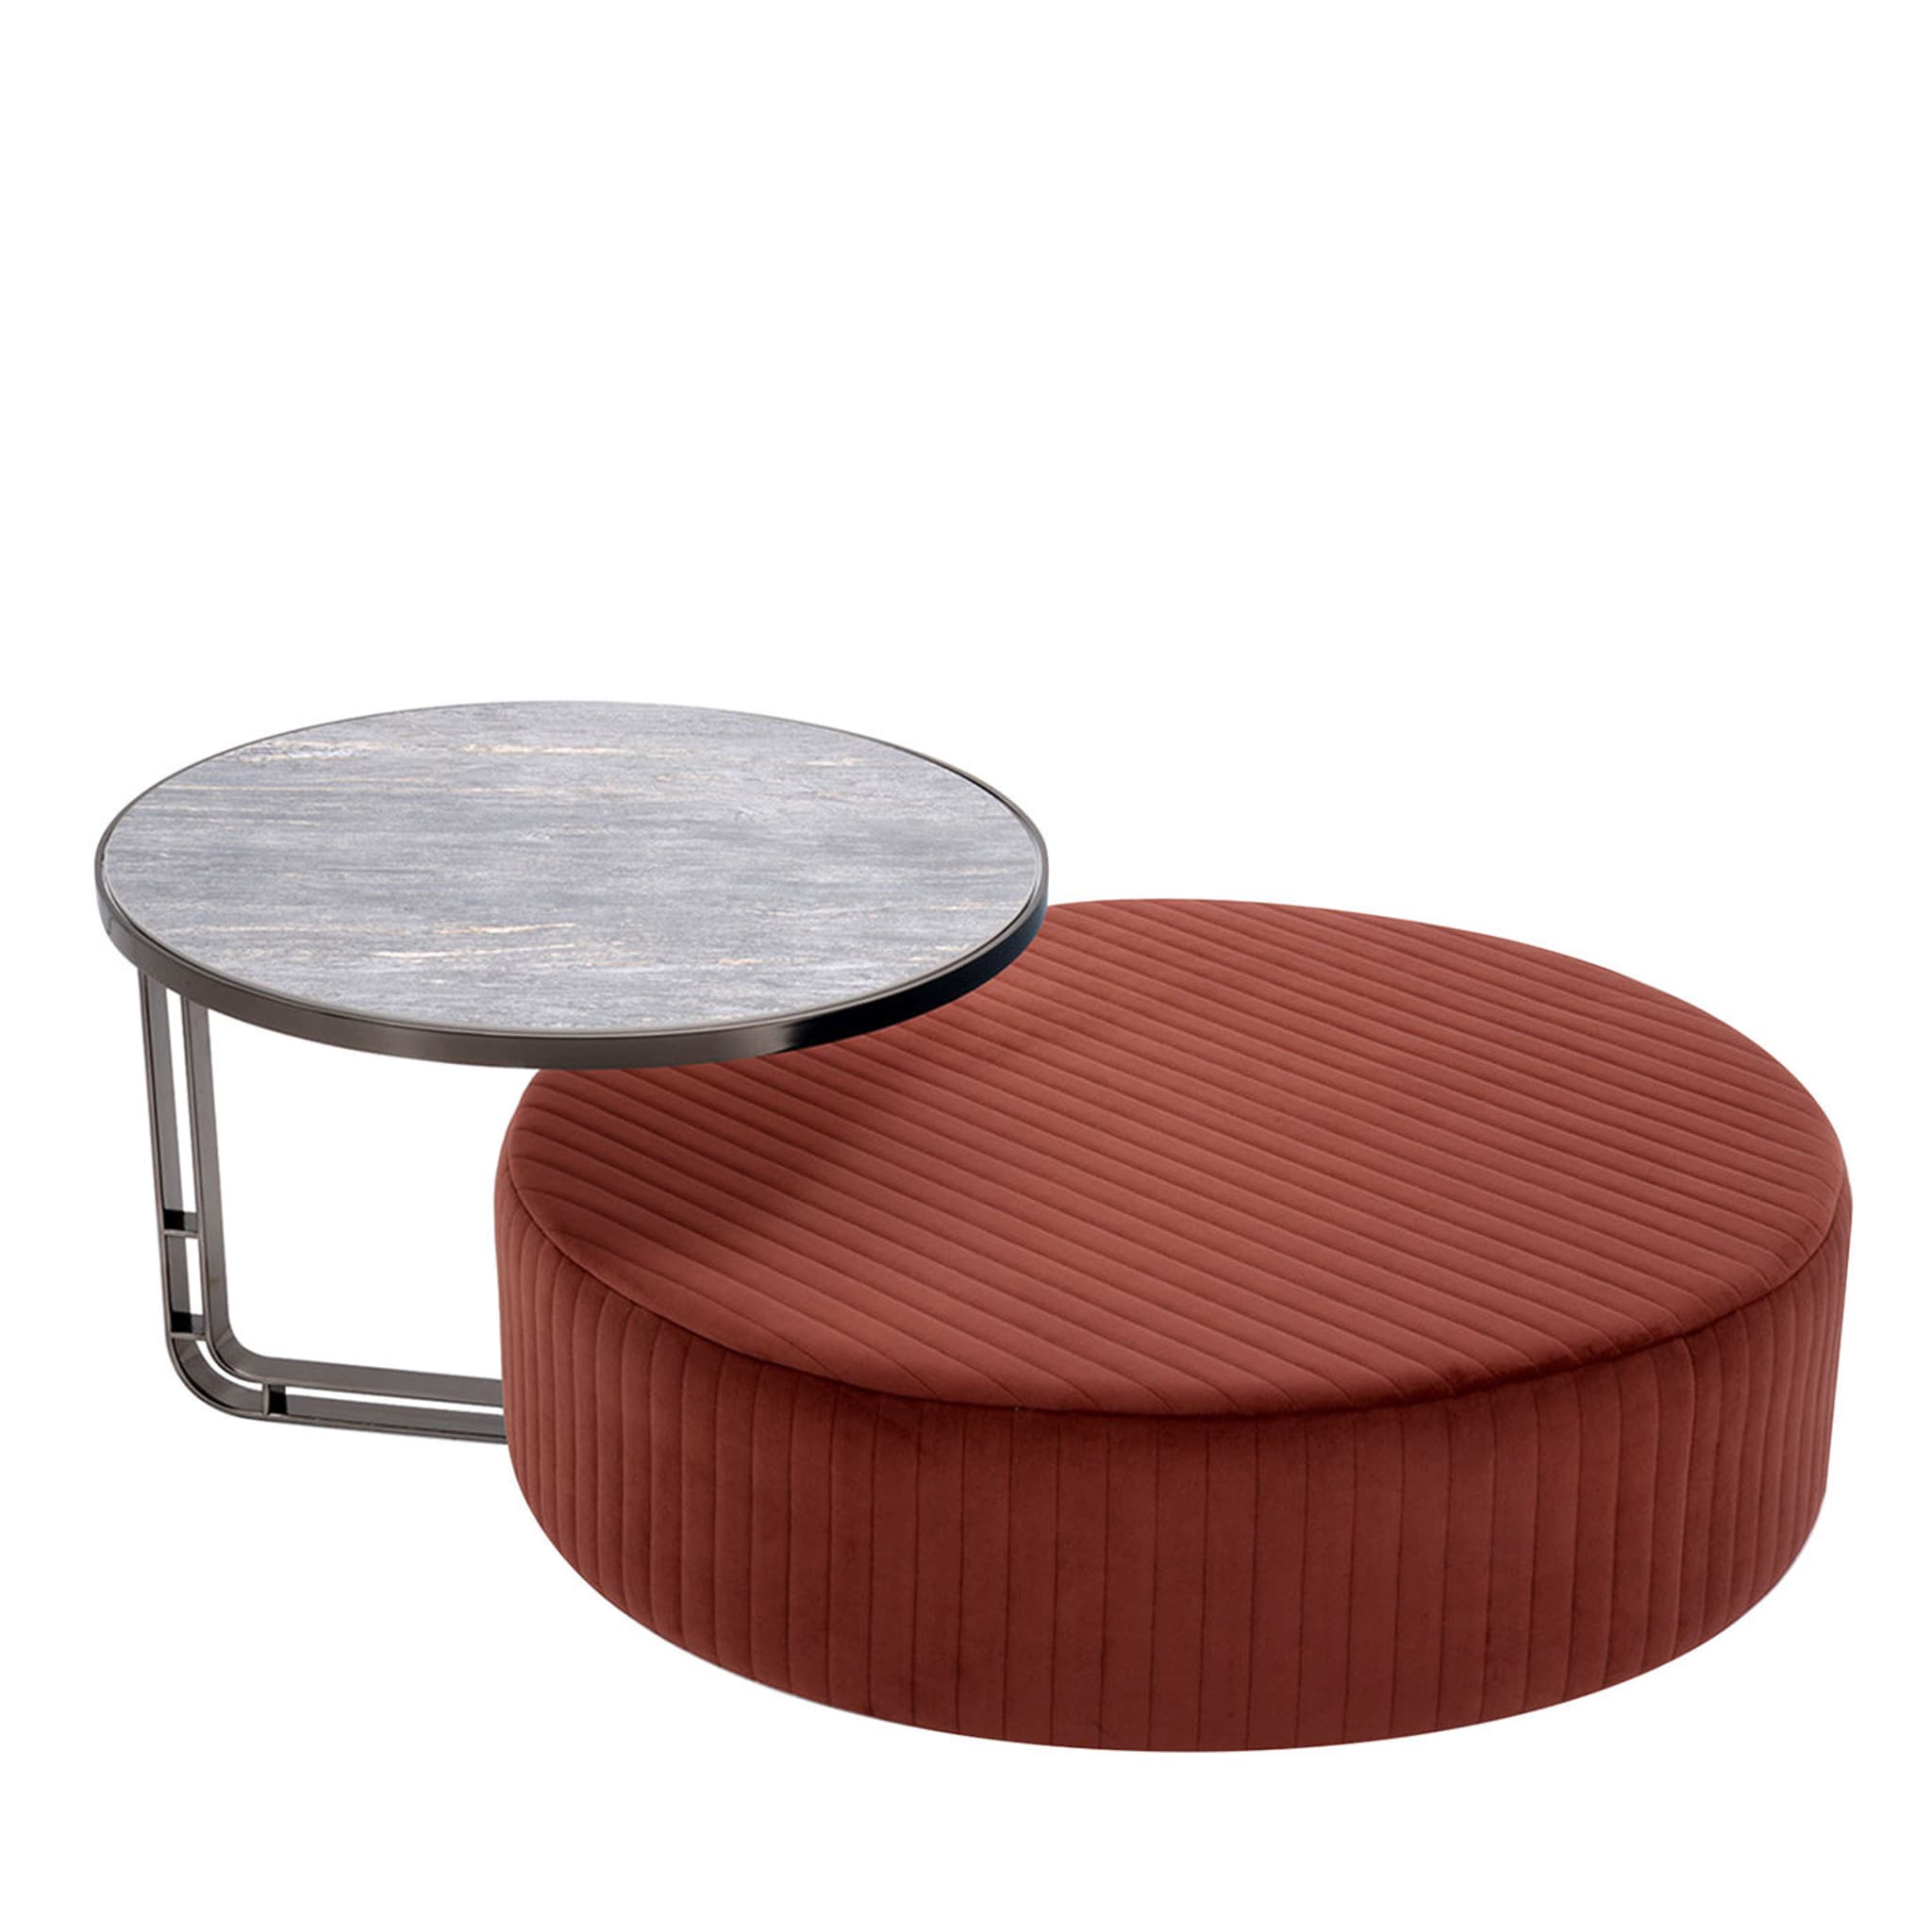 Febe Set of Burgundy Pouf and Small Table